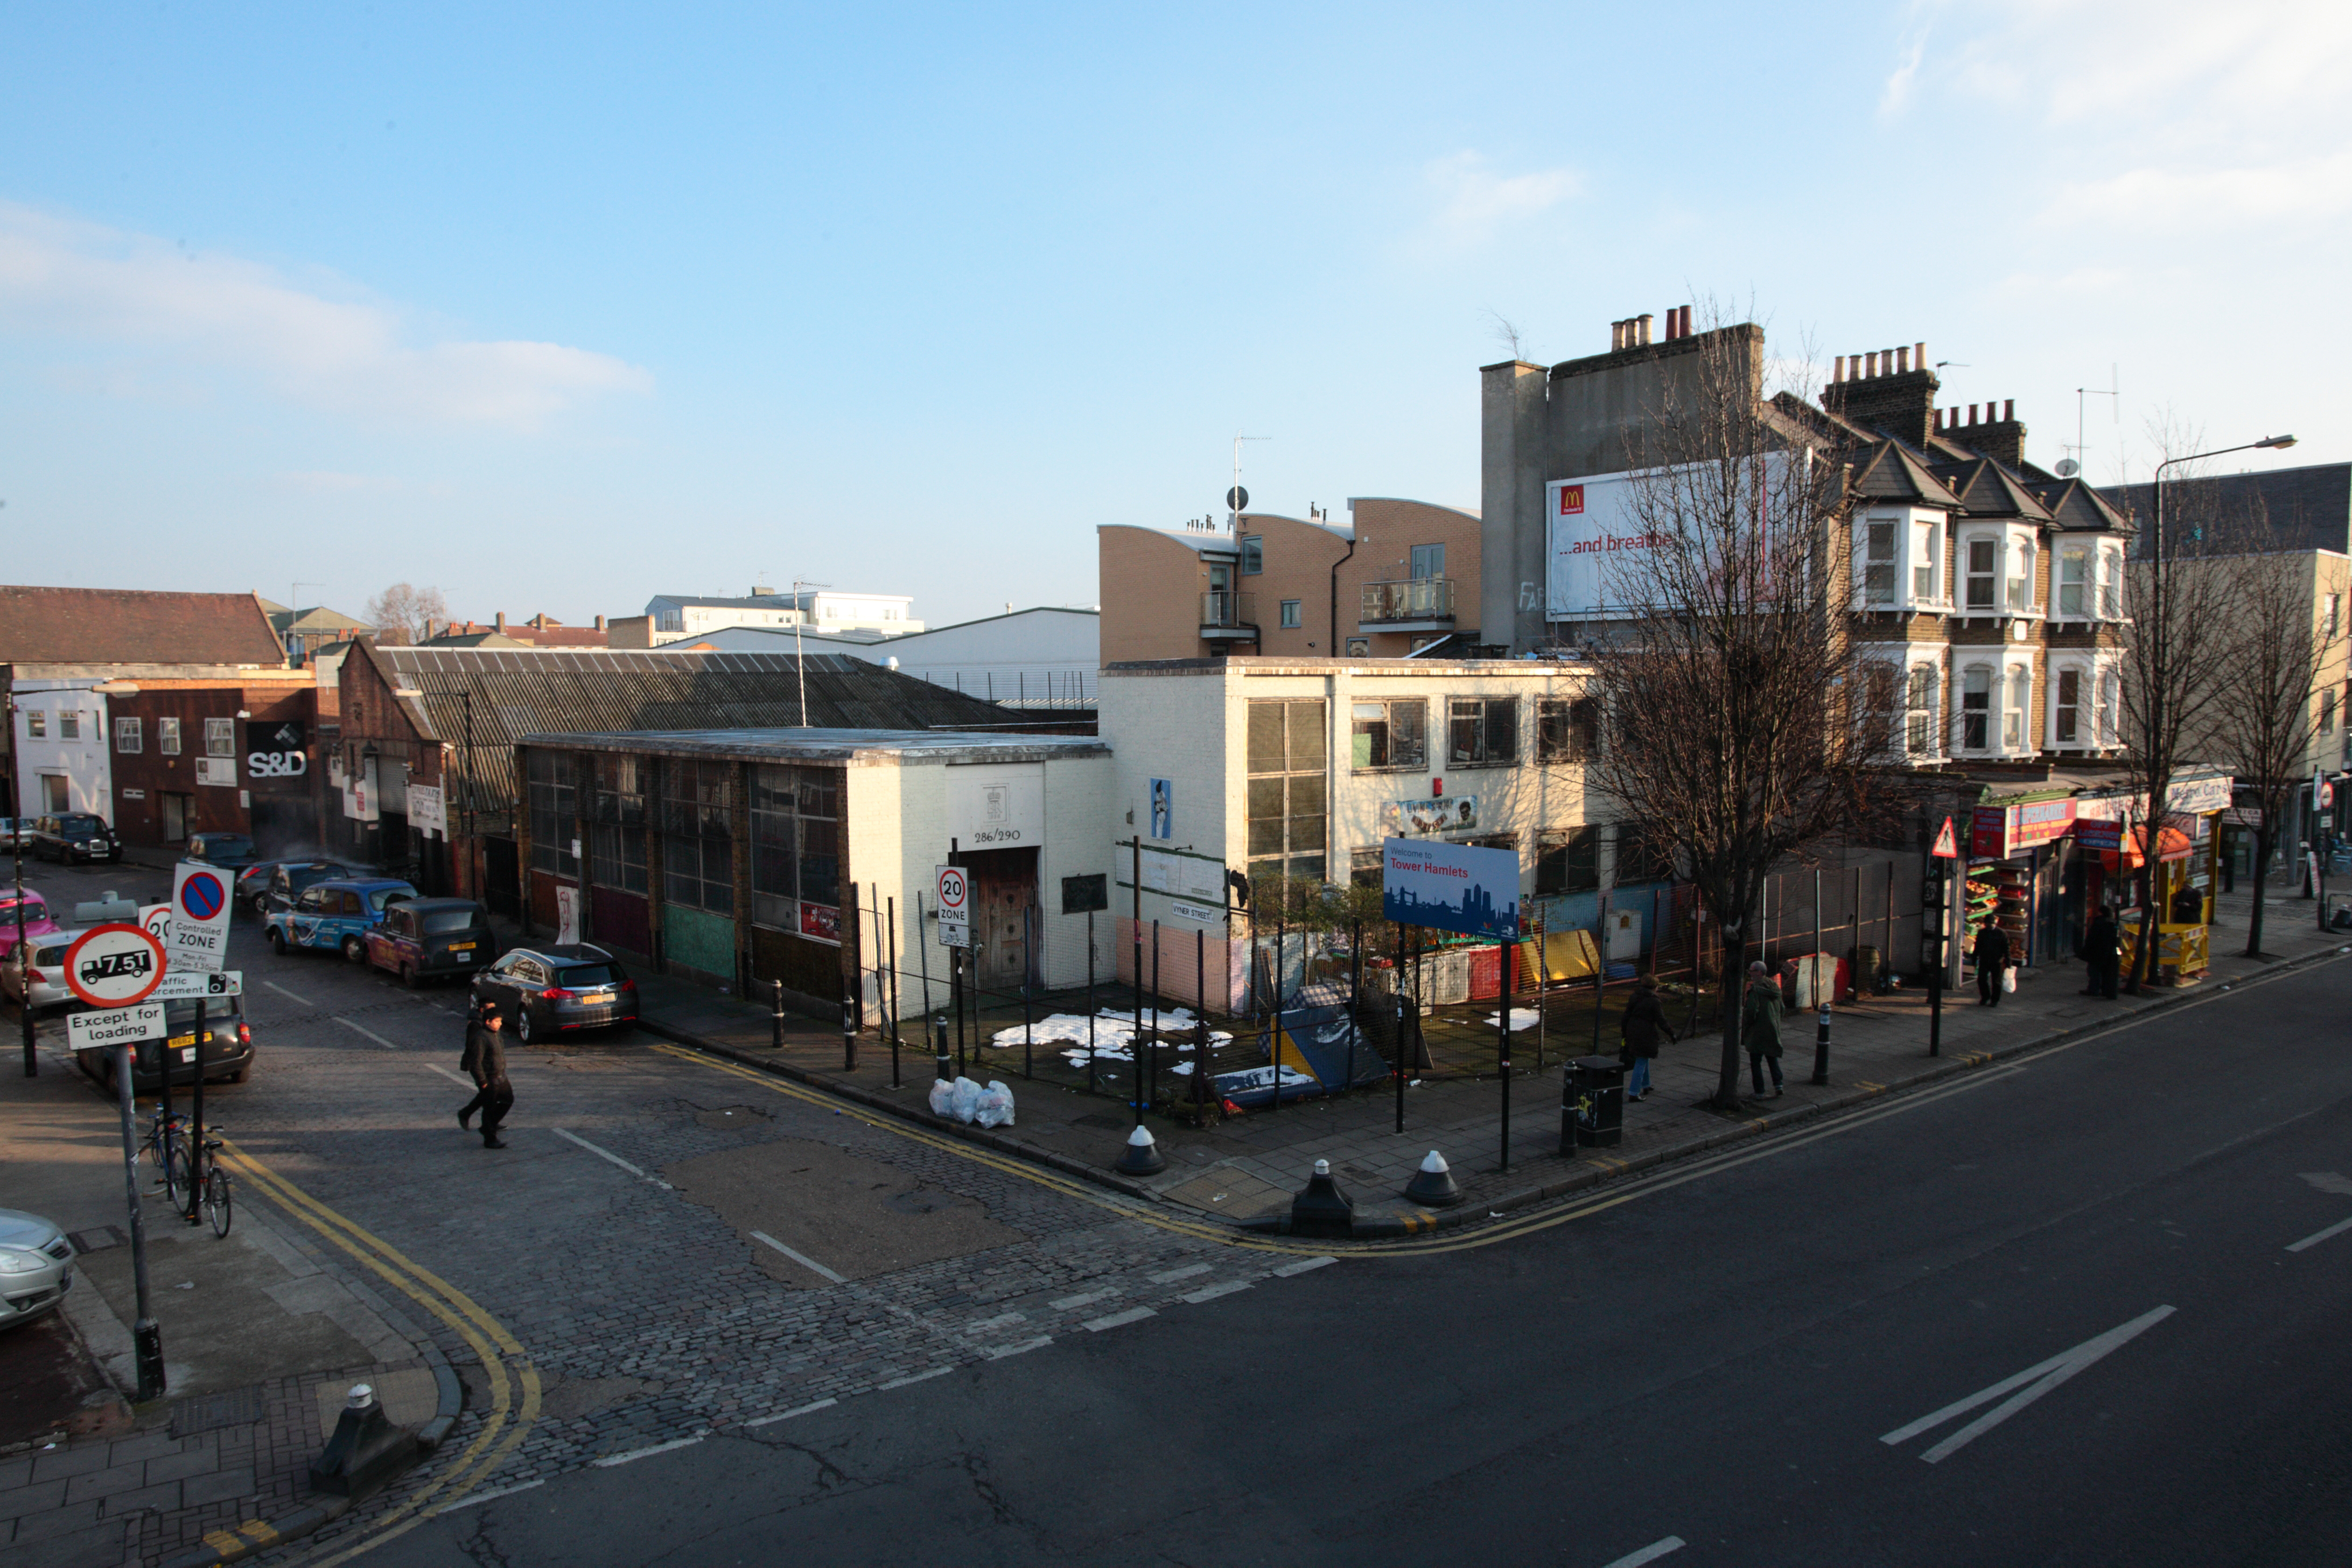 Former nursery. Acquired unconditionally. Planning obtained for nine residential units and 184 sq m commercial unit. Cambridge Heath Road, E2